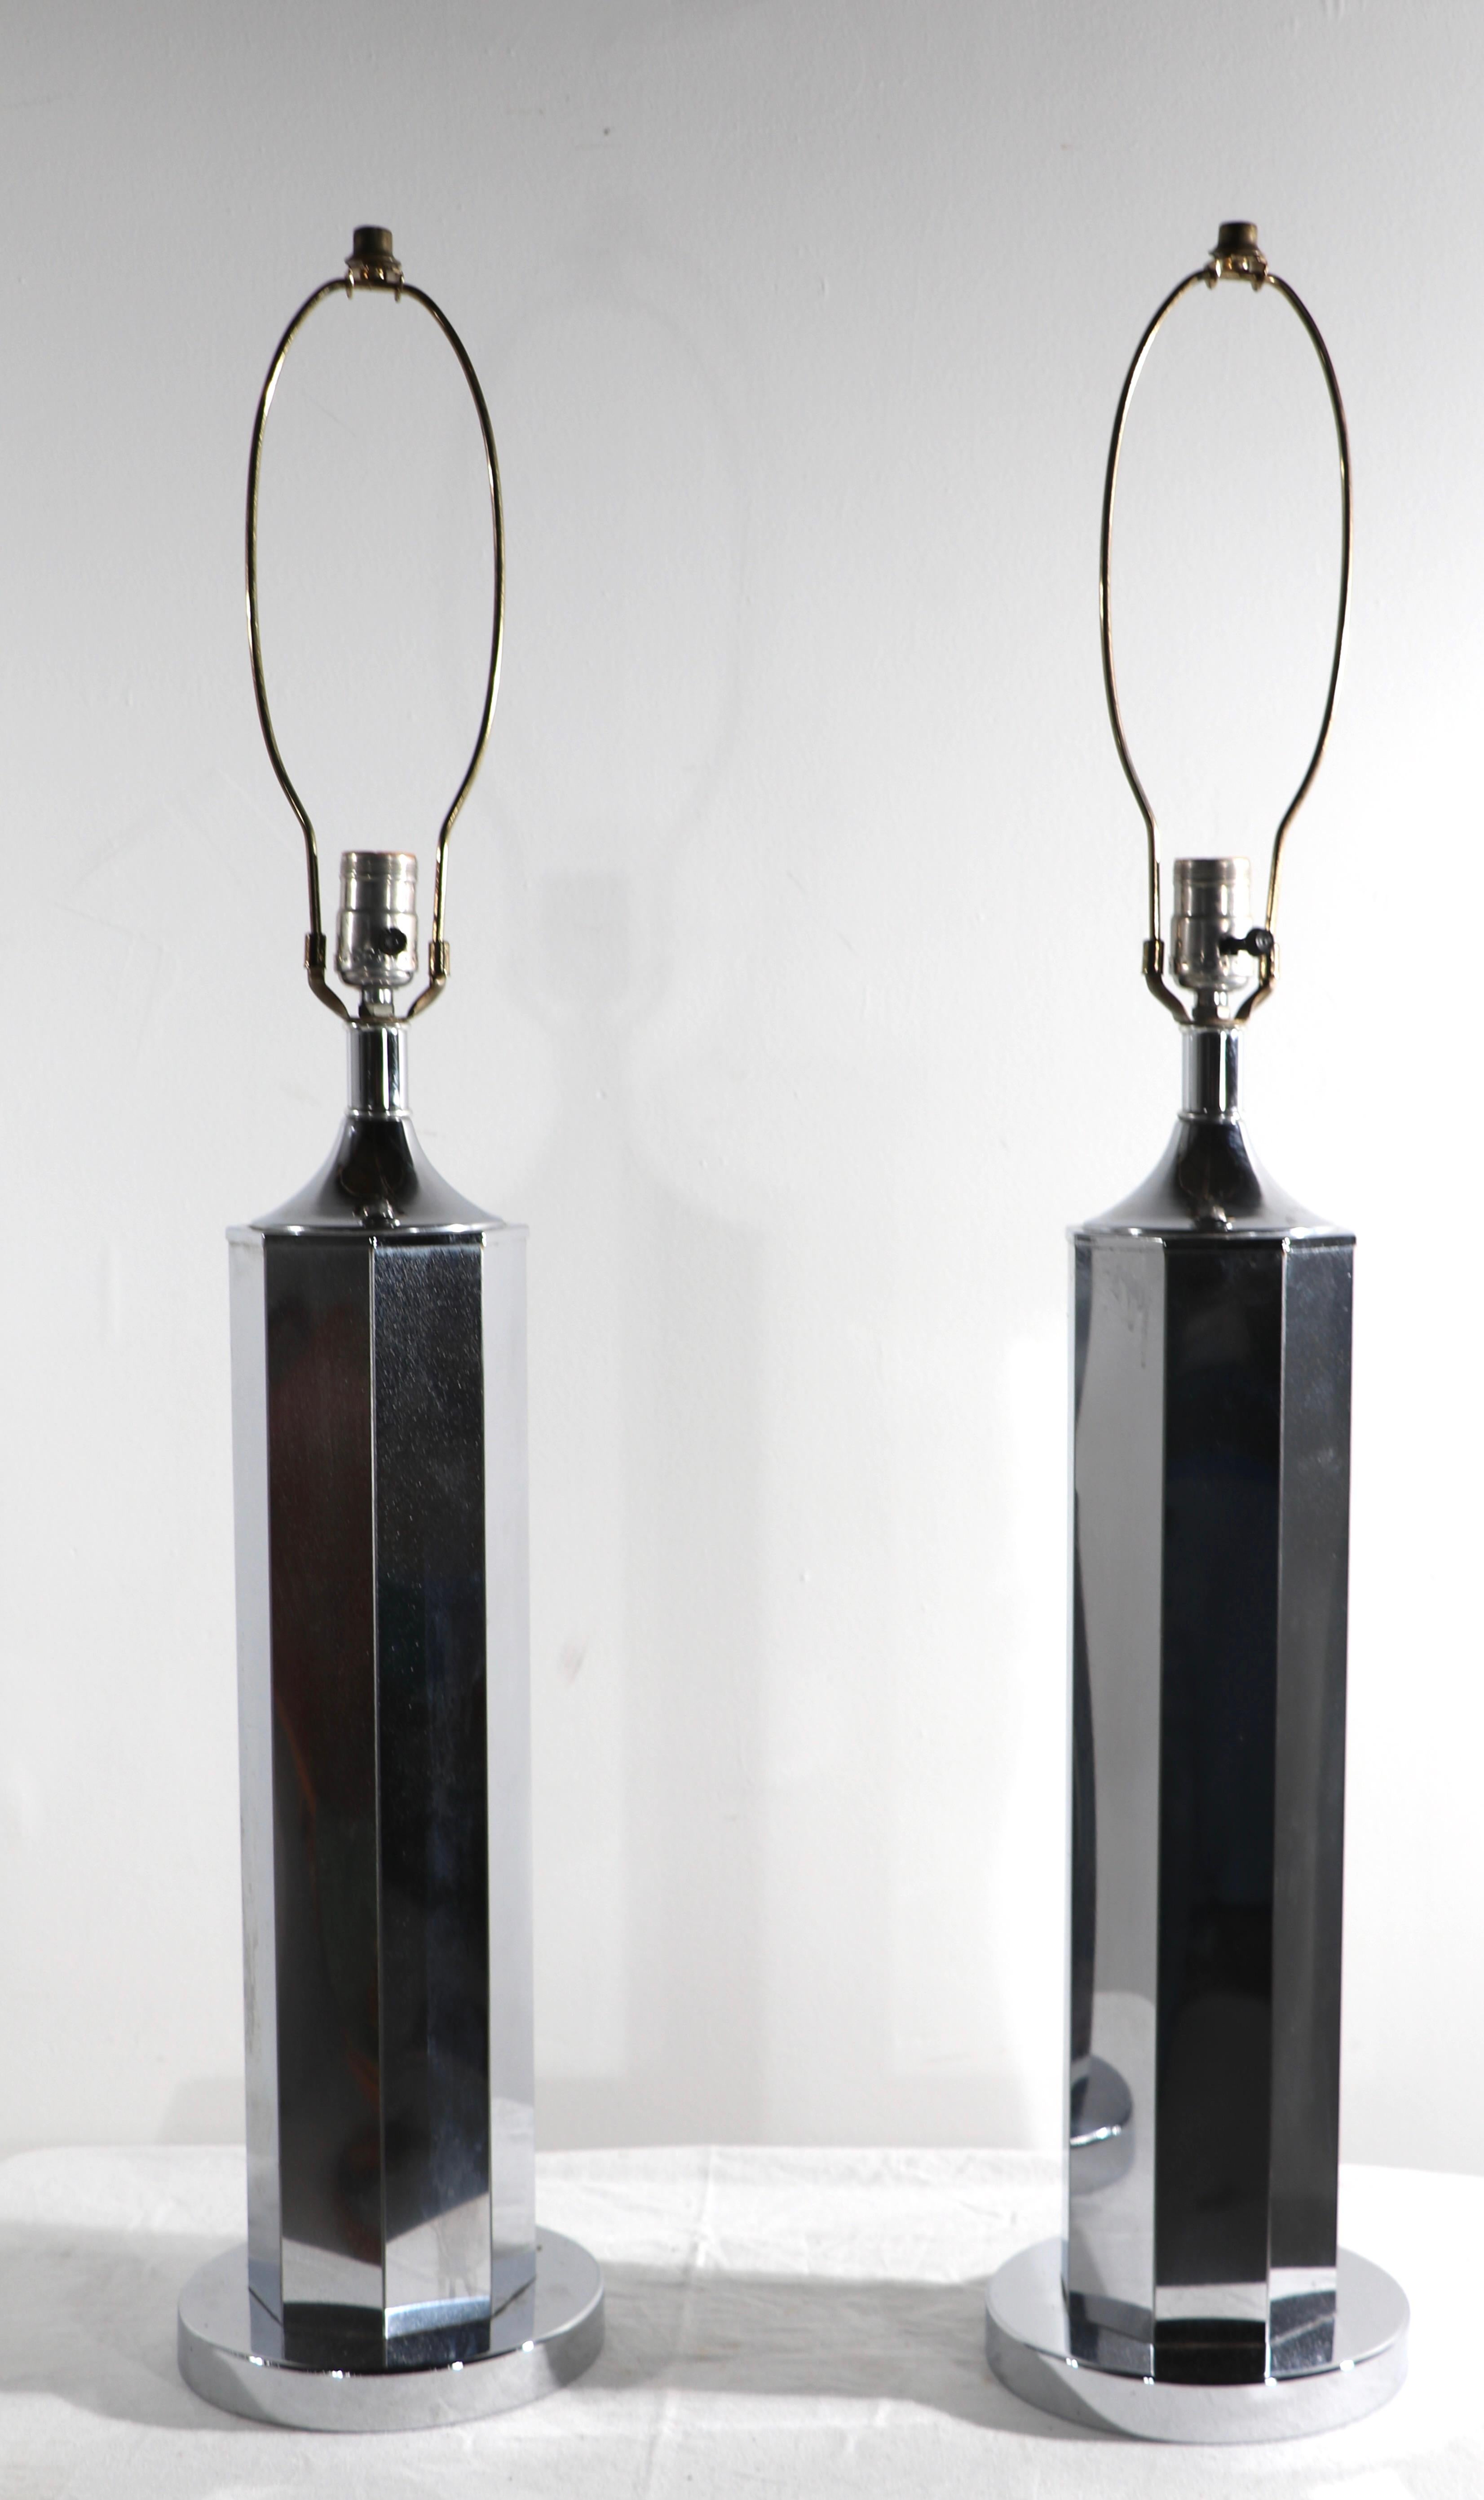 Pr. chrome table lamps circa 1970’s attributed to Sonneman Lighting. The chrome body is suggestive of a pencil in form, on round disk form base. Both show minor wear to the chrome finish, normal and consistent with age, both are clean and working,